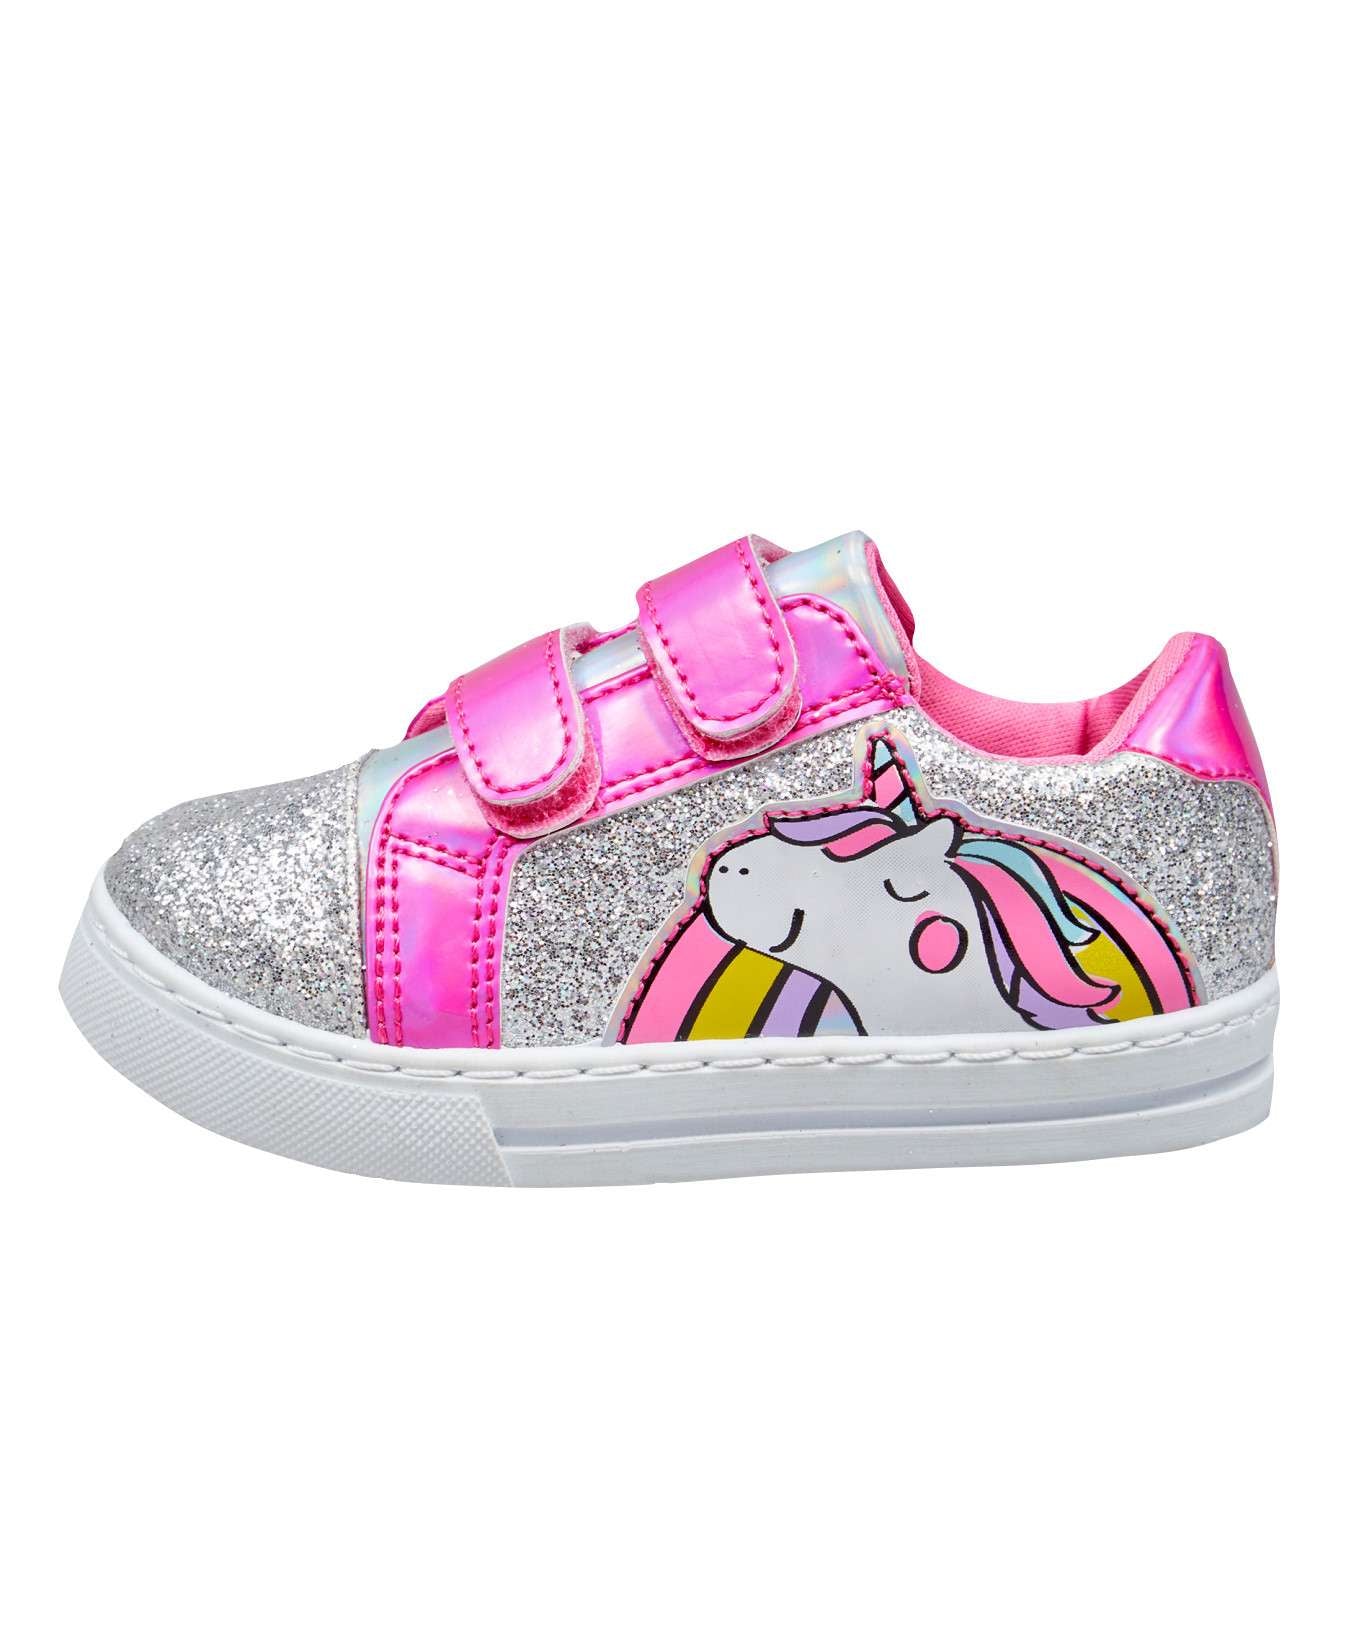 Girls Silver Glitter Unicorn Casual Rainbow Trainers Shoes